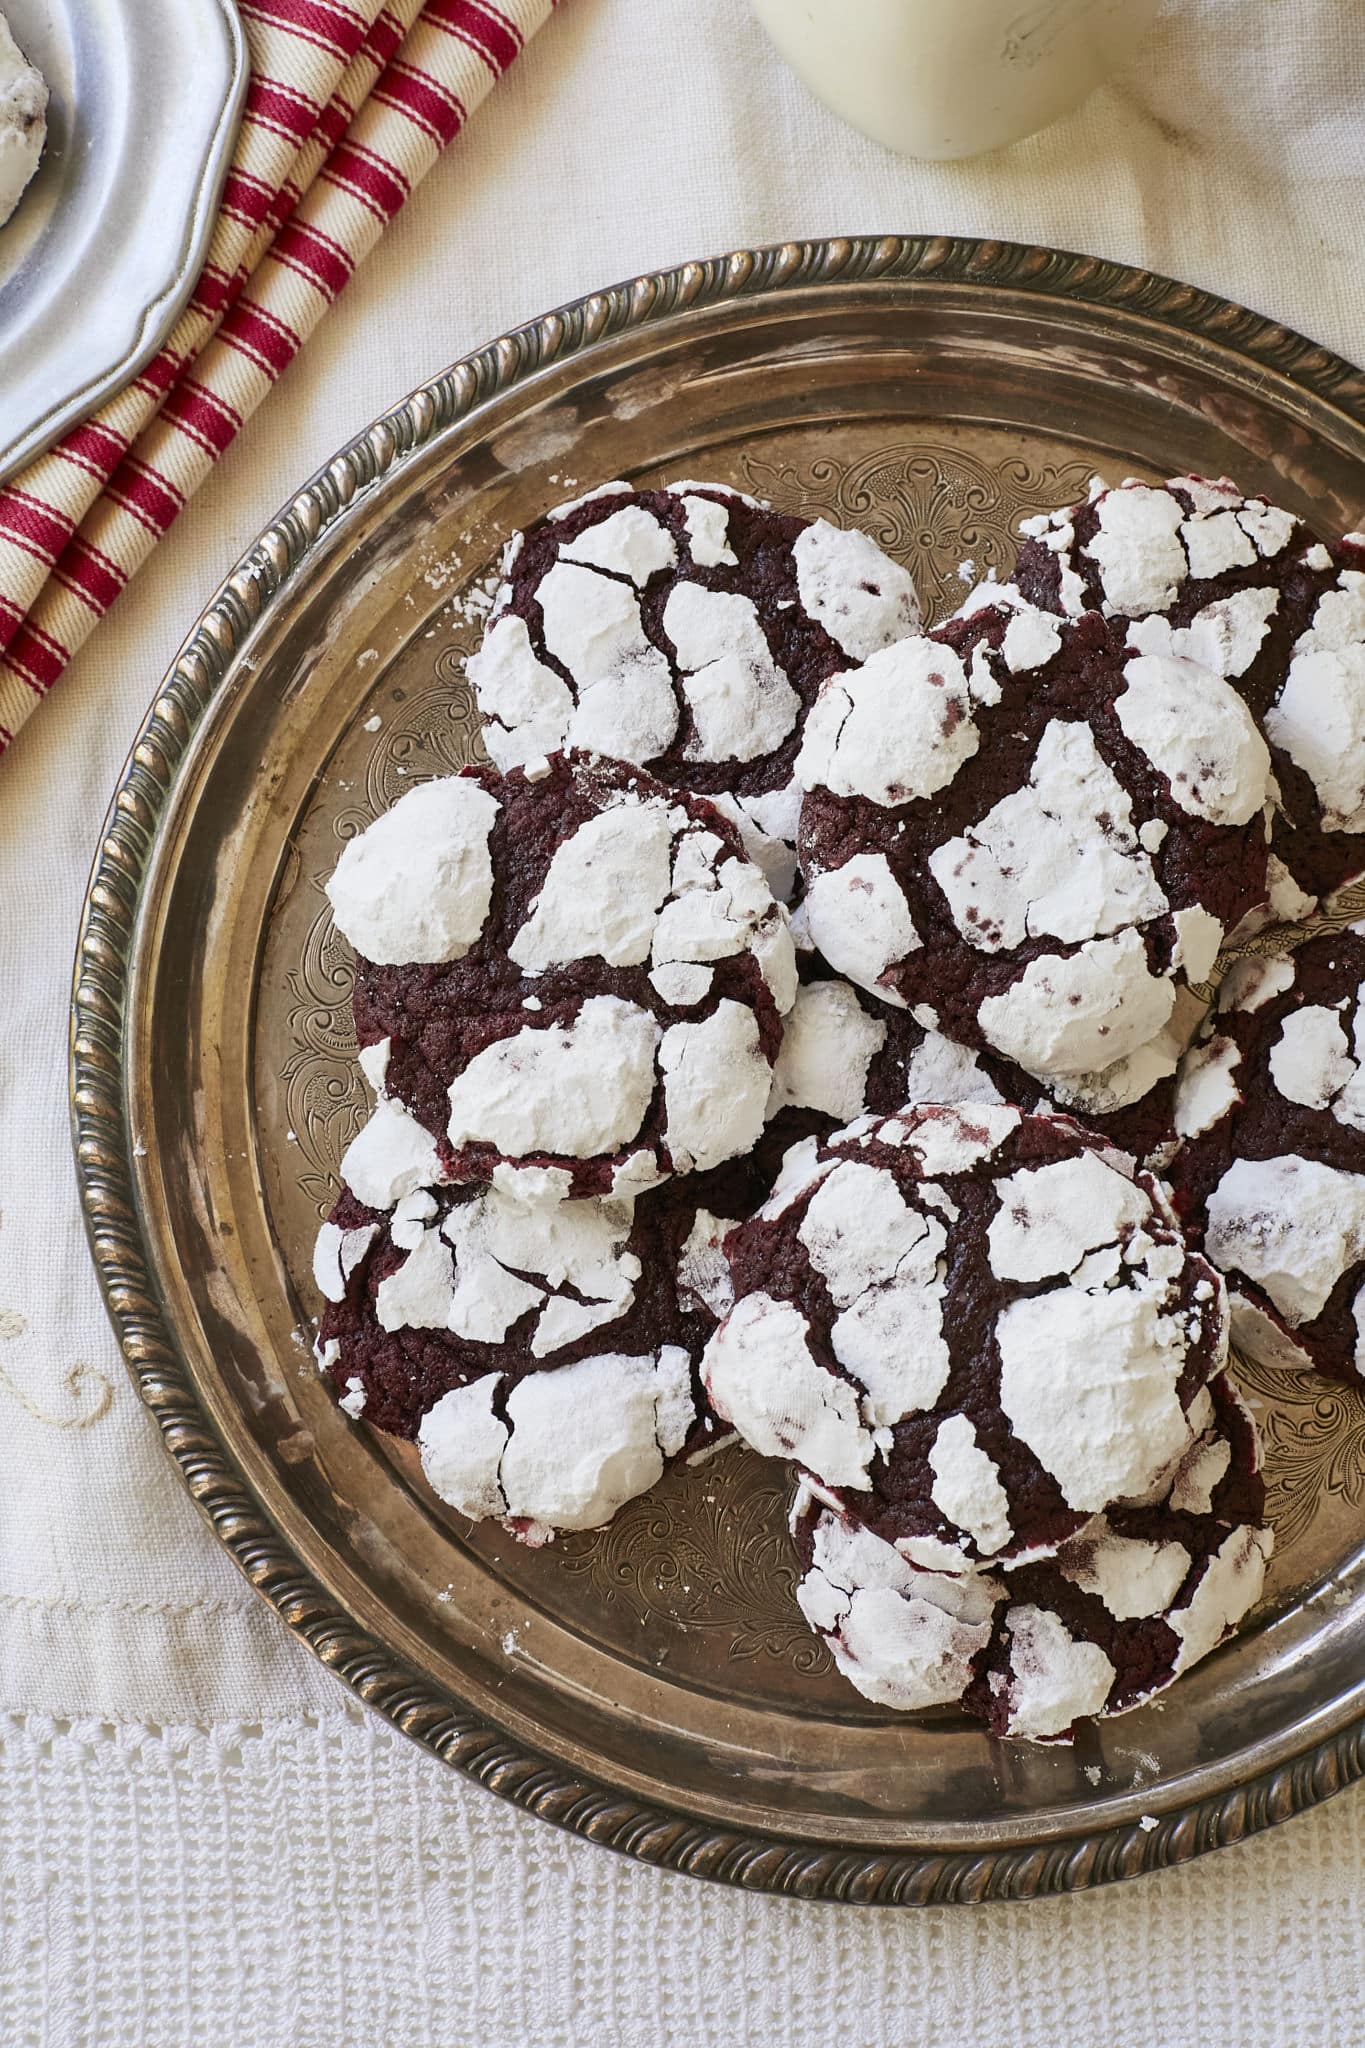 Red Velvet Crinkle Cookies are served on a silver platter. The homemade crinkle cookies have a crackled top and are coated in powdered sugar.